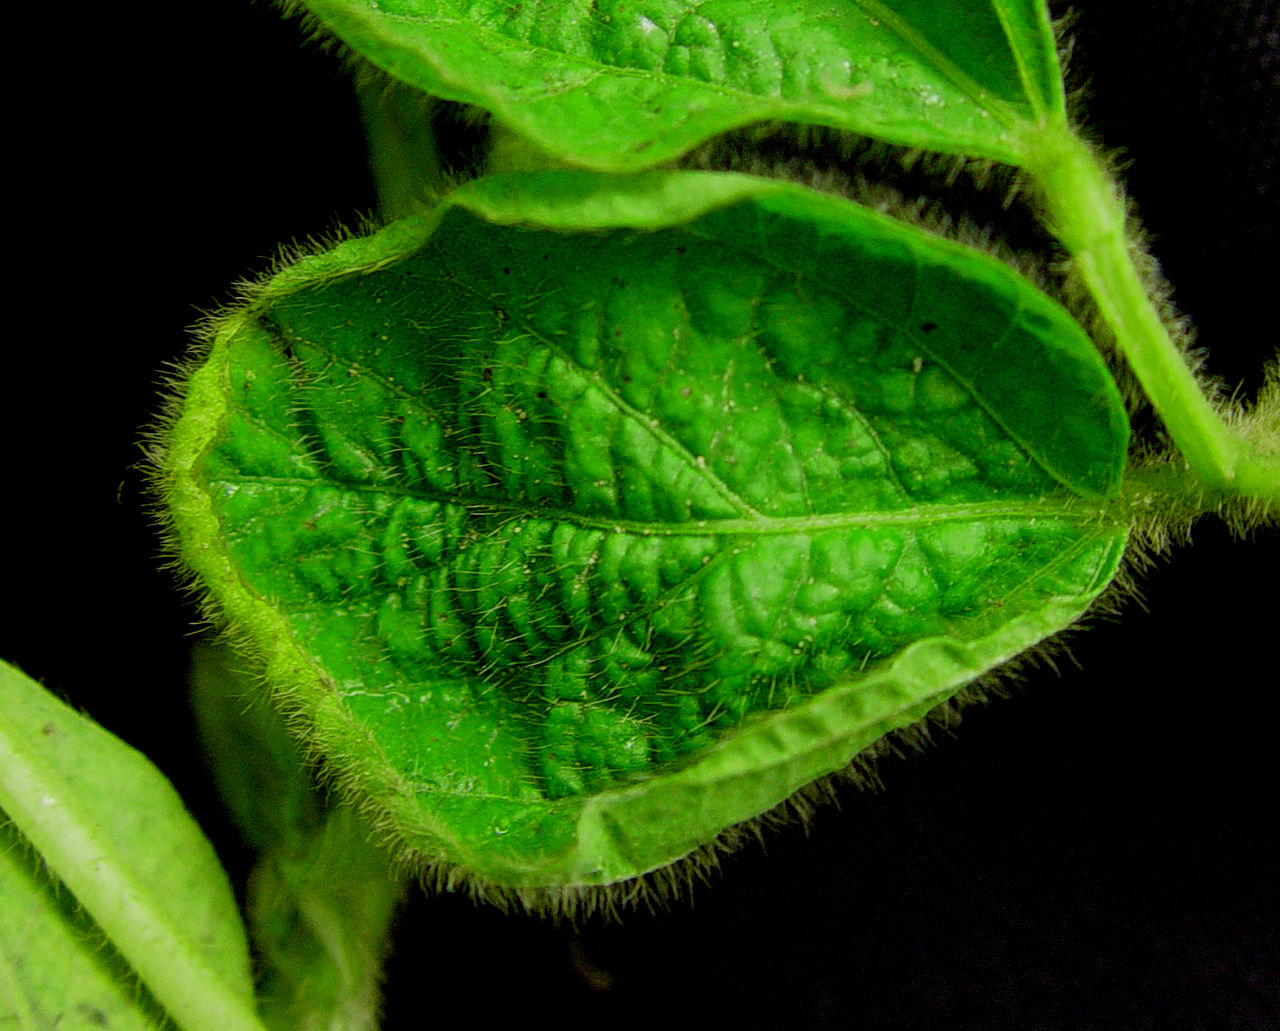 Dicamba injury to soybean.